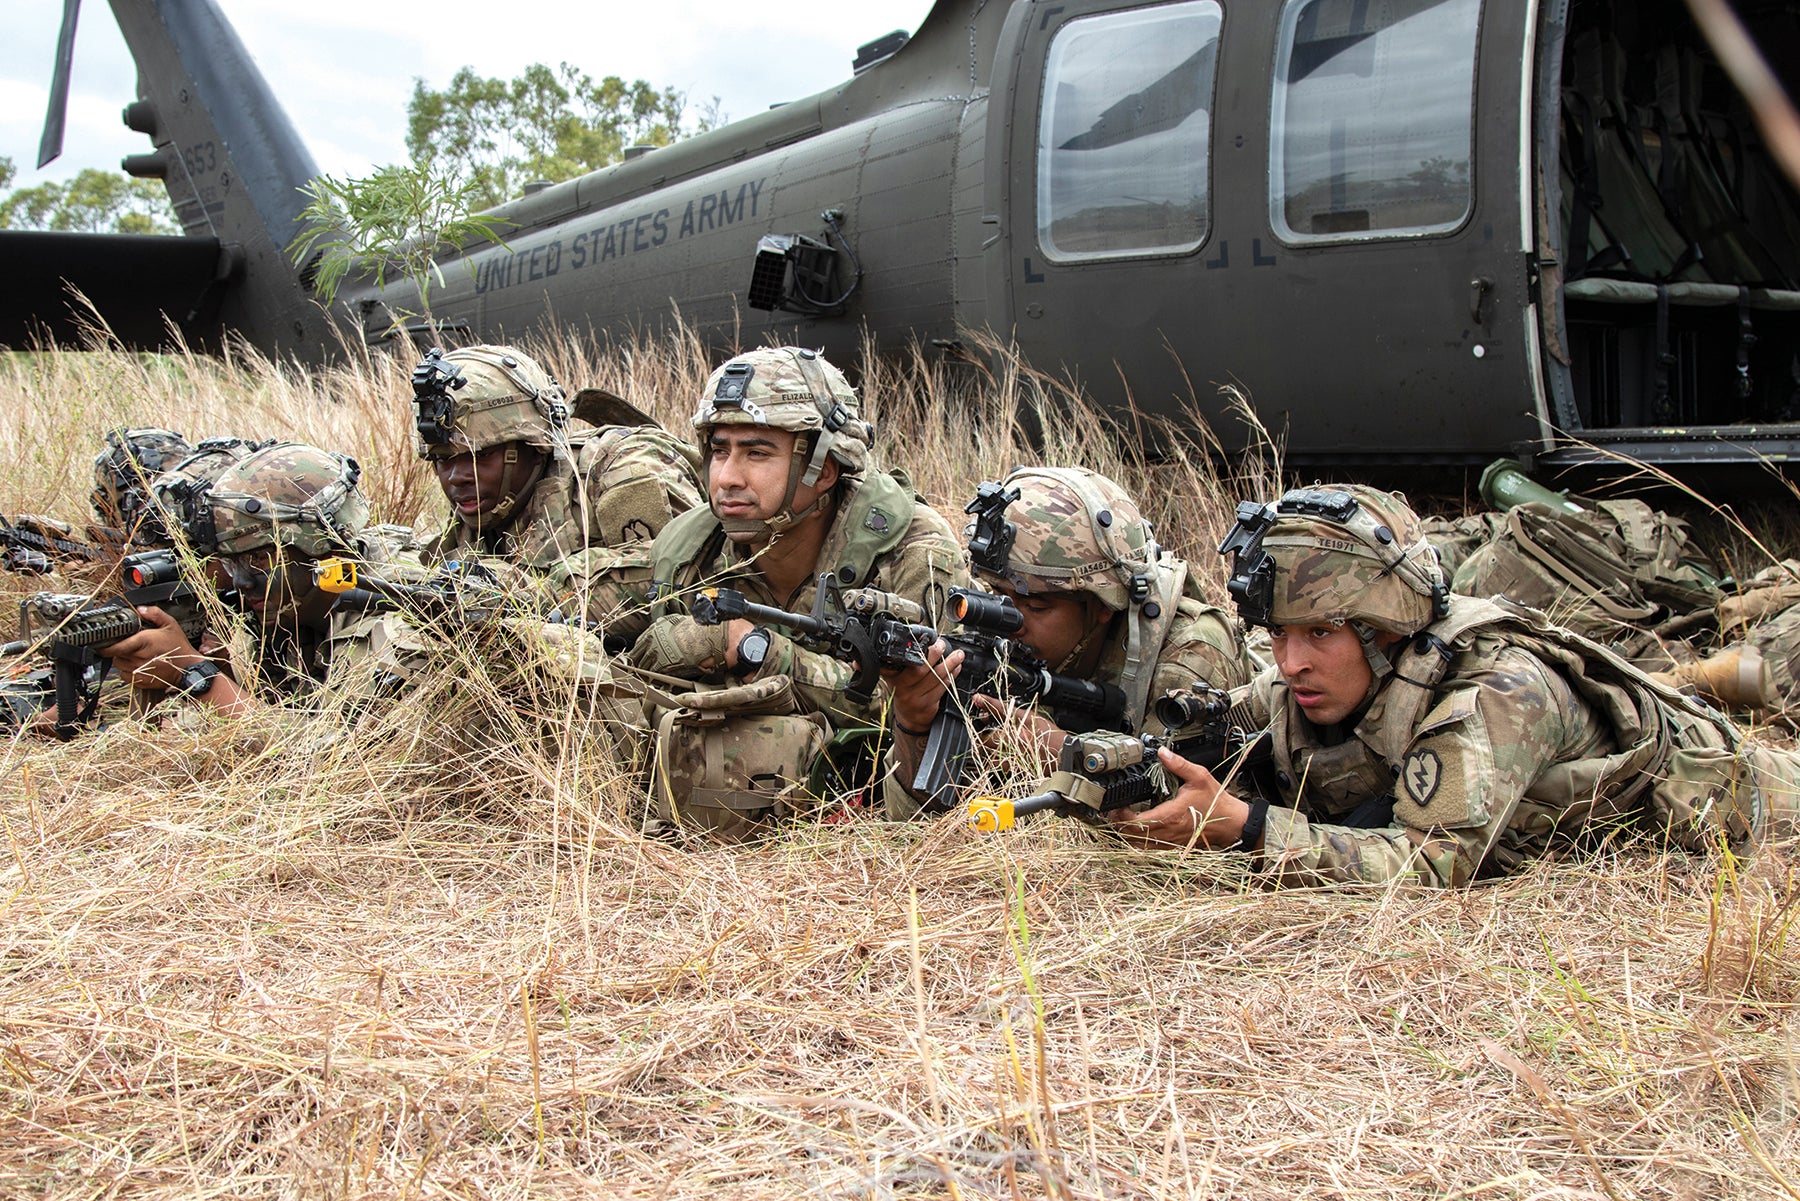 Soldiers with the 25th Infantry Division train in Queensland, Australia, during Talisman Sabre. (Credit: U.S. Army/Spc. Richard Carlisi)